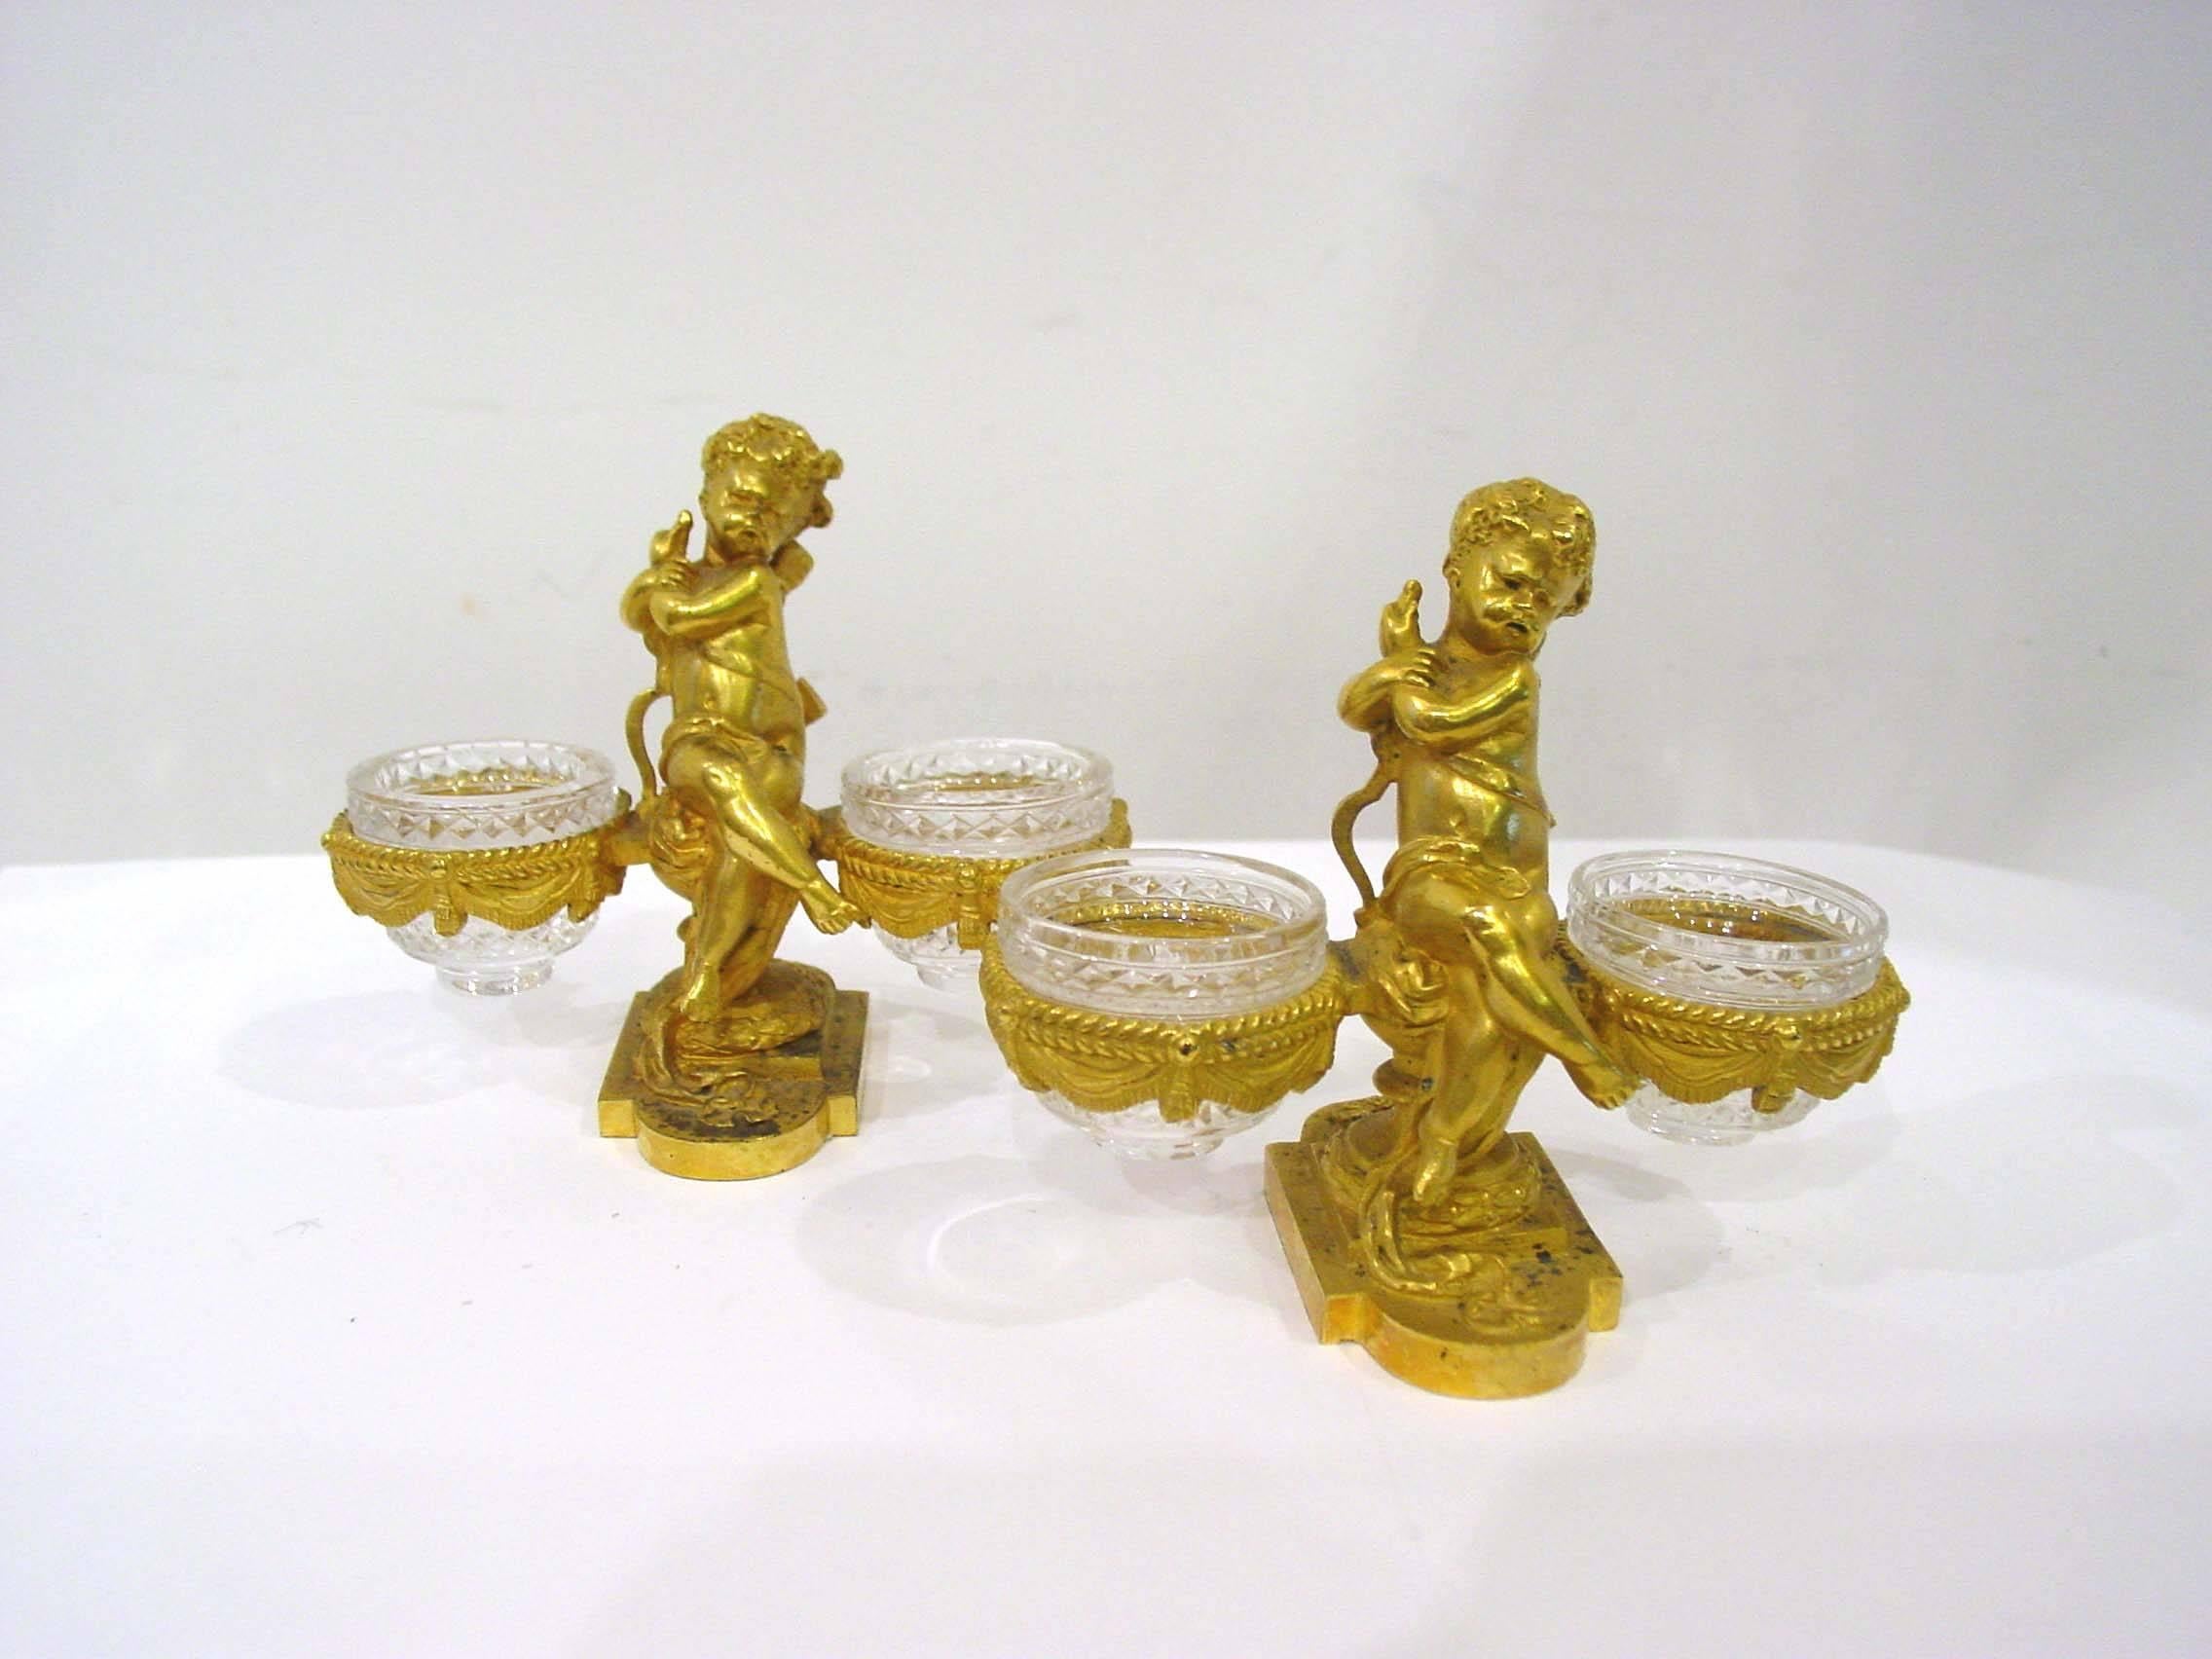 Great ensemble set signed Baccarat, consisting of pair of figural open salt cellars and figural gilt bronze vase holder.
The gilt bronze pieces with exquisite details. the crystals beautifully carved. All pieces have Baccarat stamp under the bronze